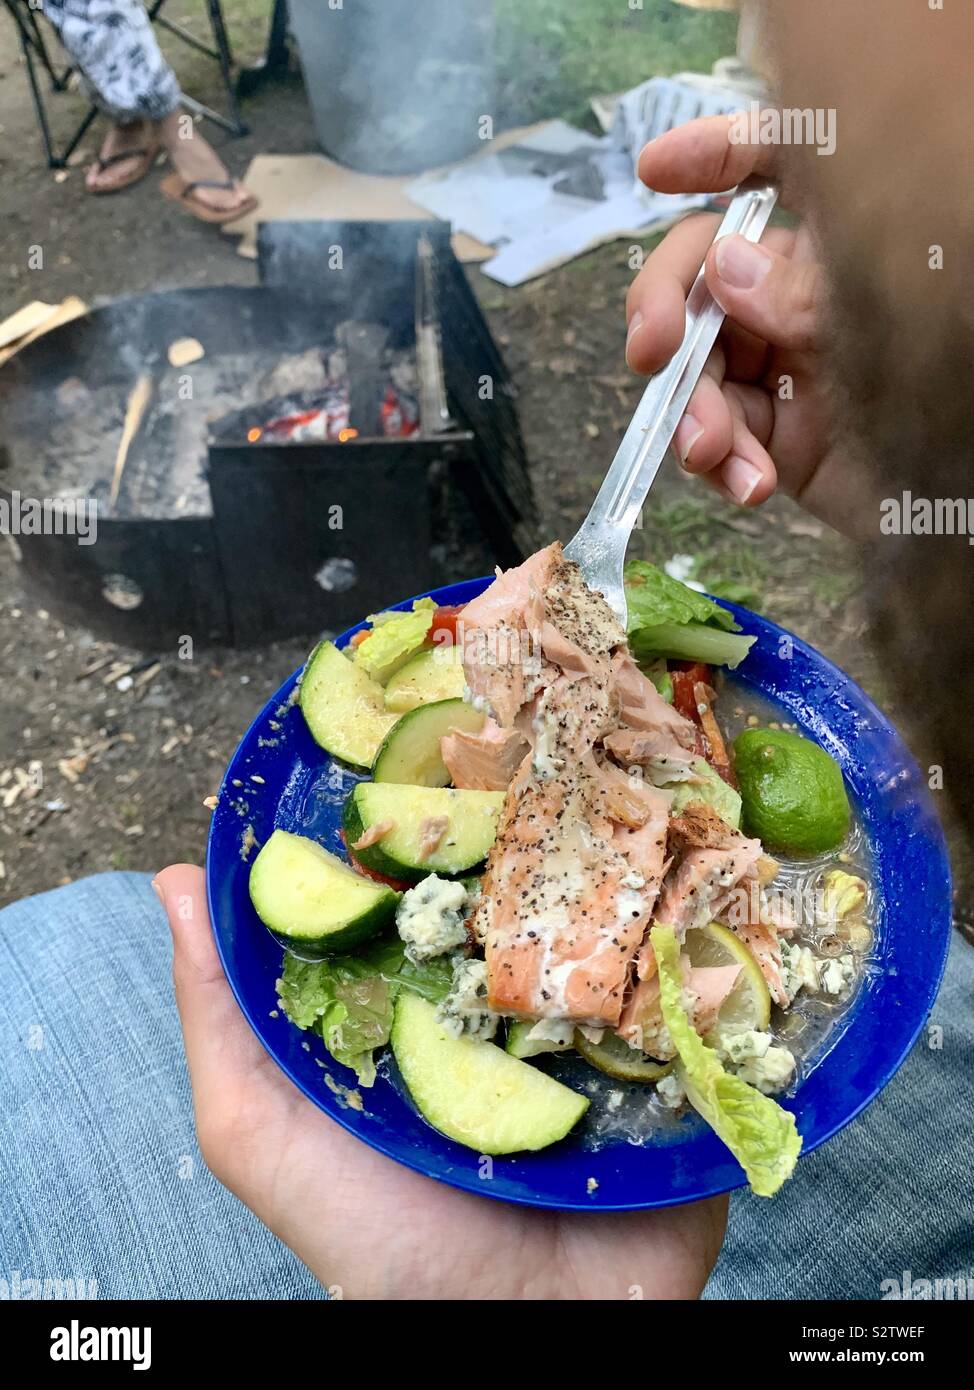 A healthy, delicious salmon dinner while roughing it at a campsite. Stock Photo